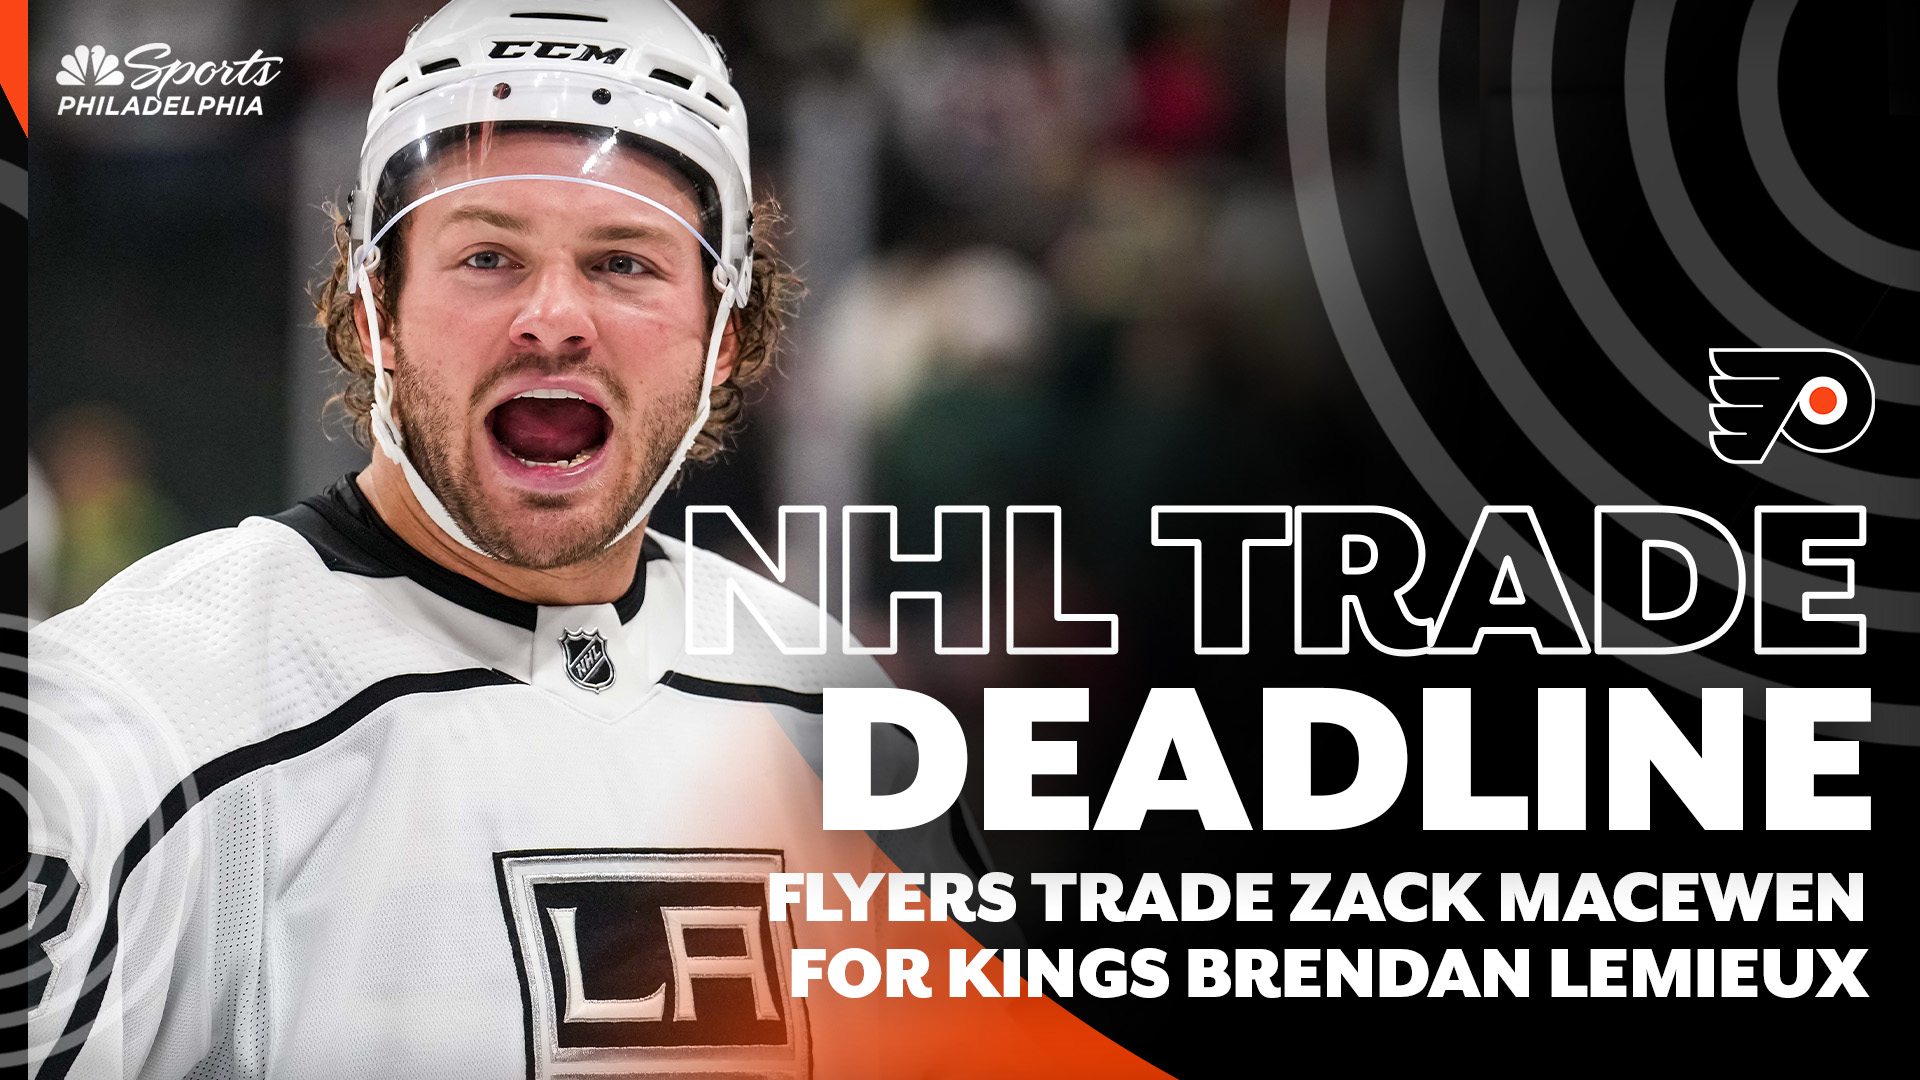 Brendan Lemieux requested trade before Rangers dealt him to Kings